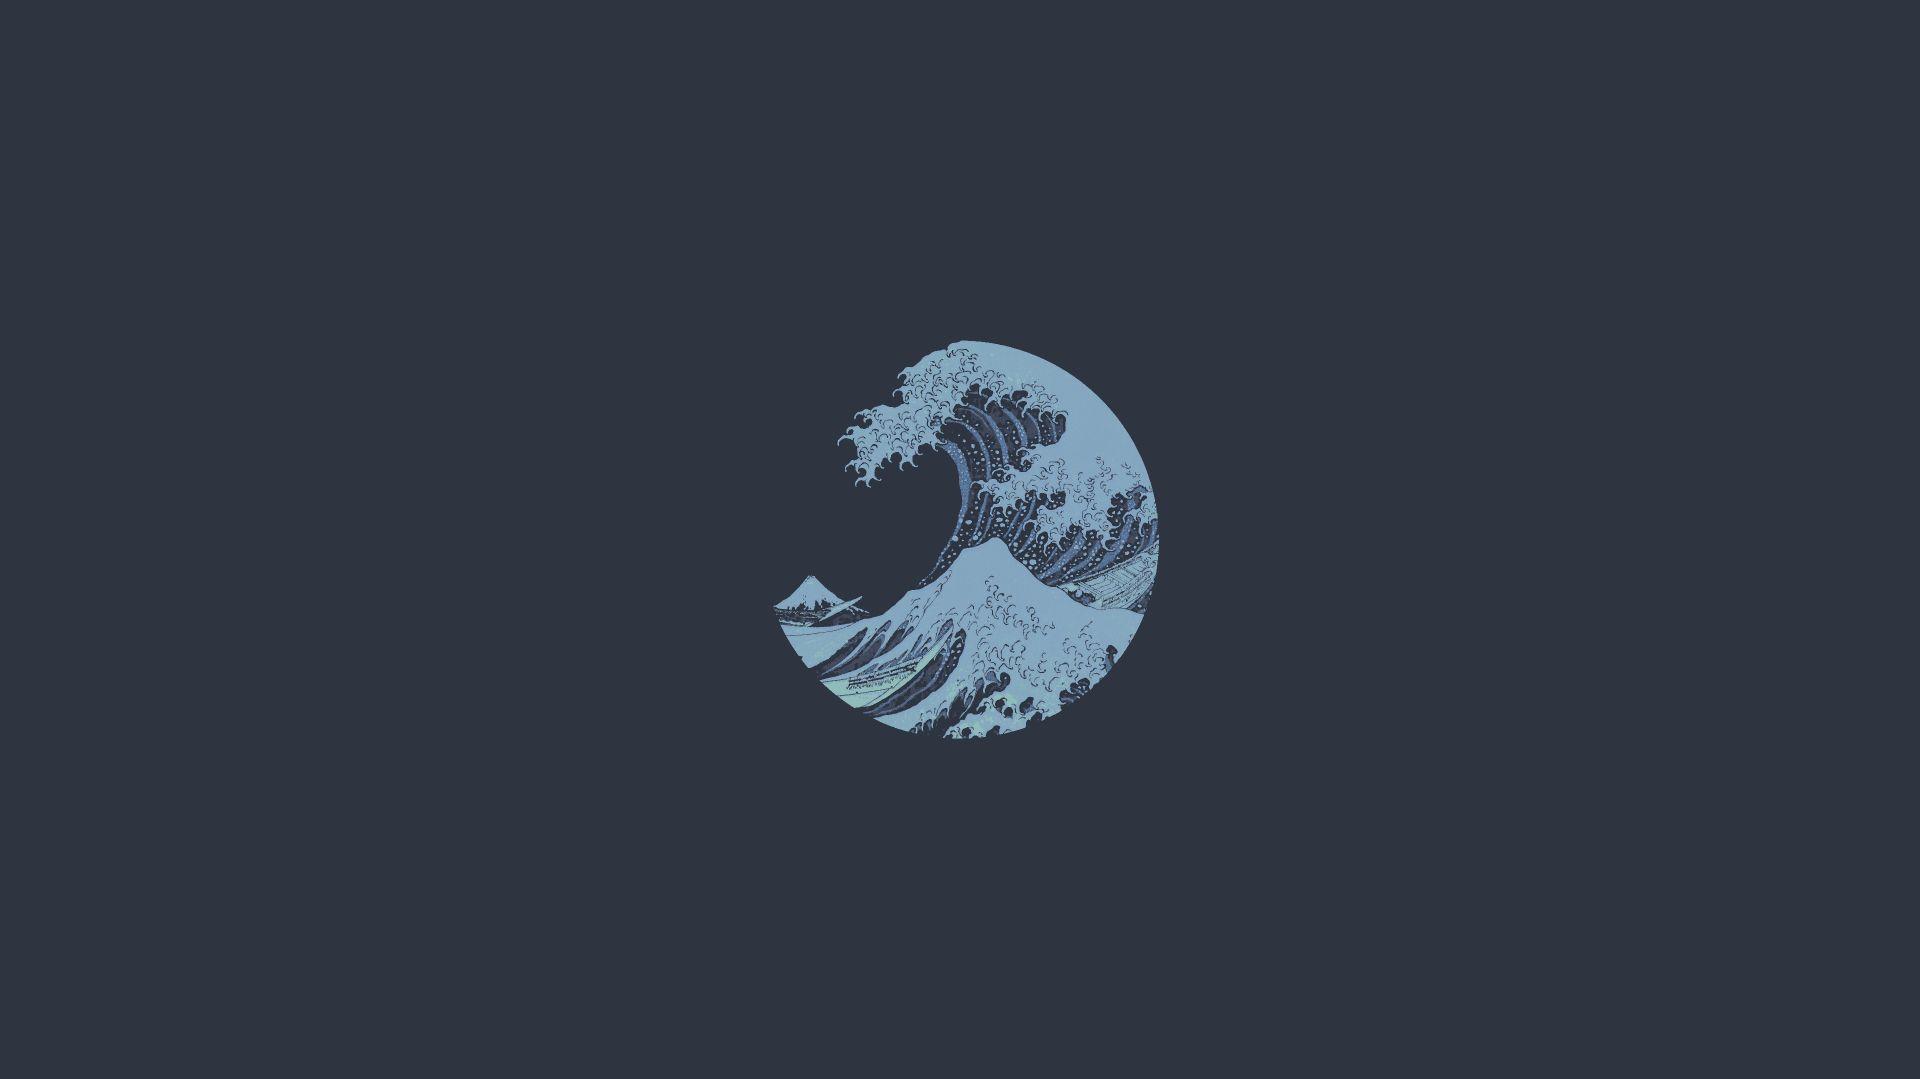 The Great Wave Minimalist HD Wallpaper Eyecandy For Your Xfce